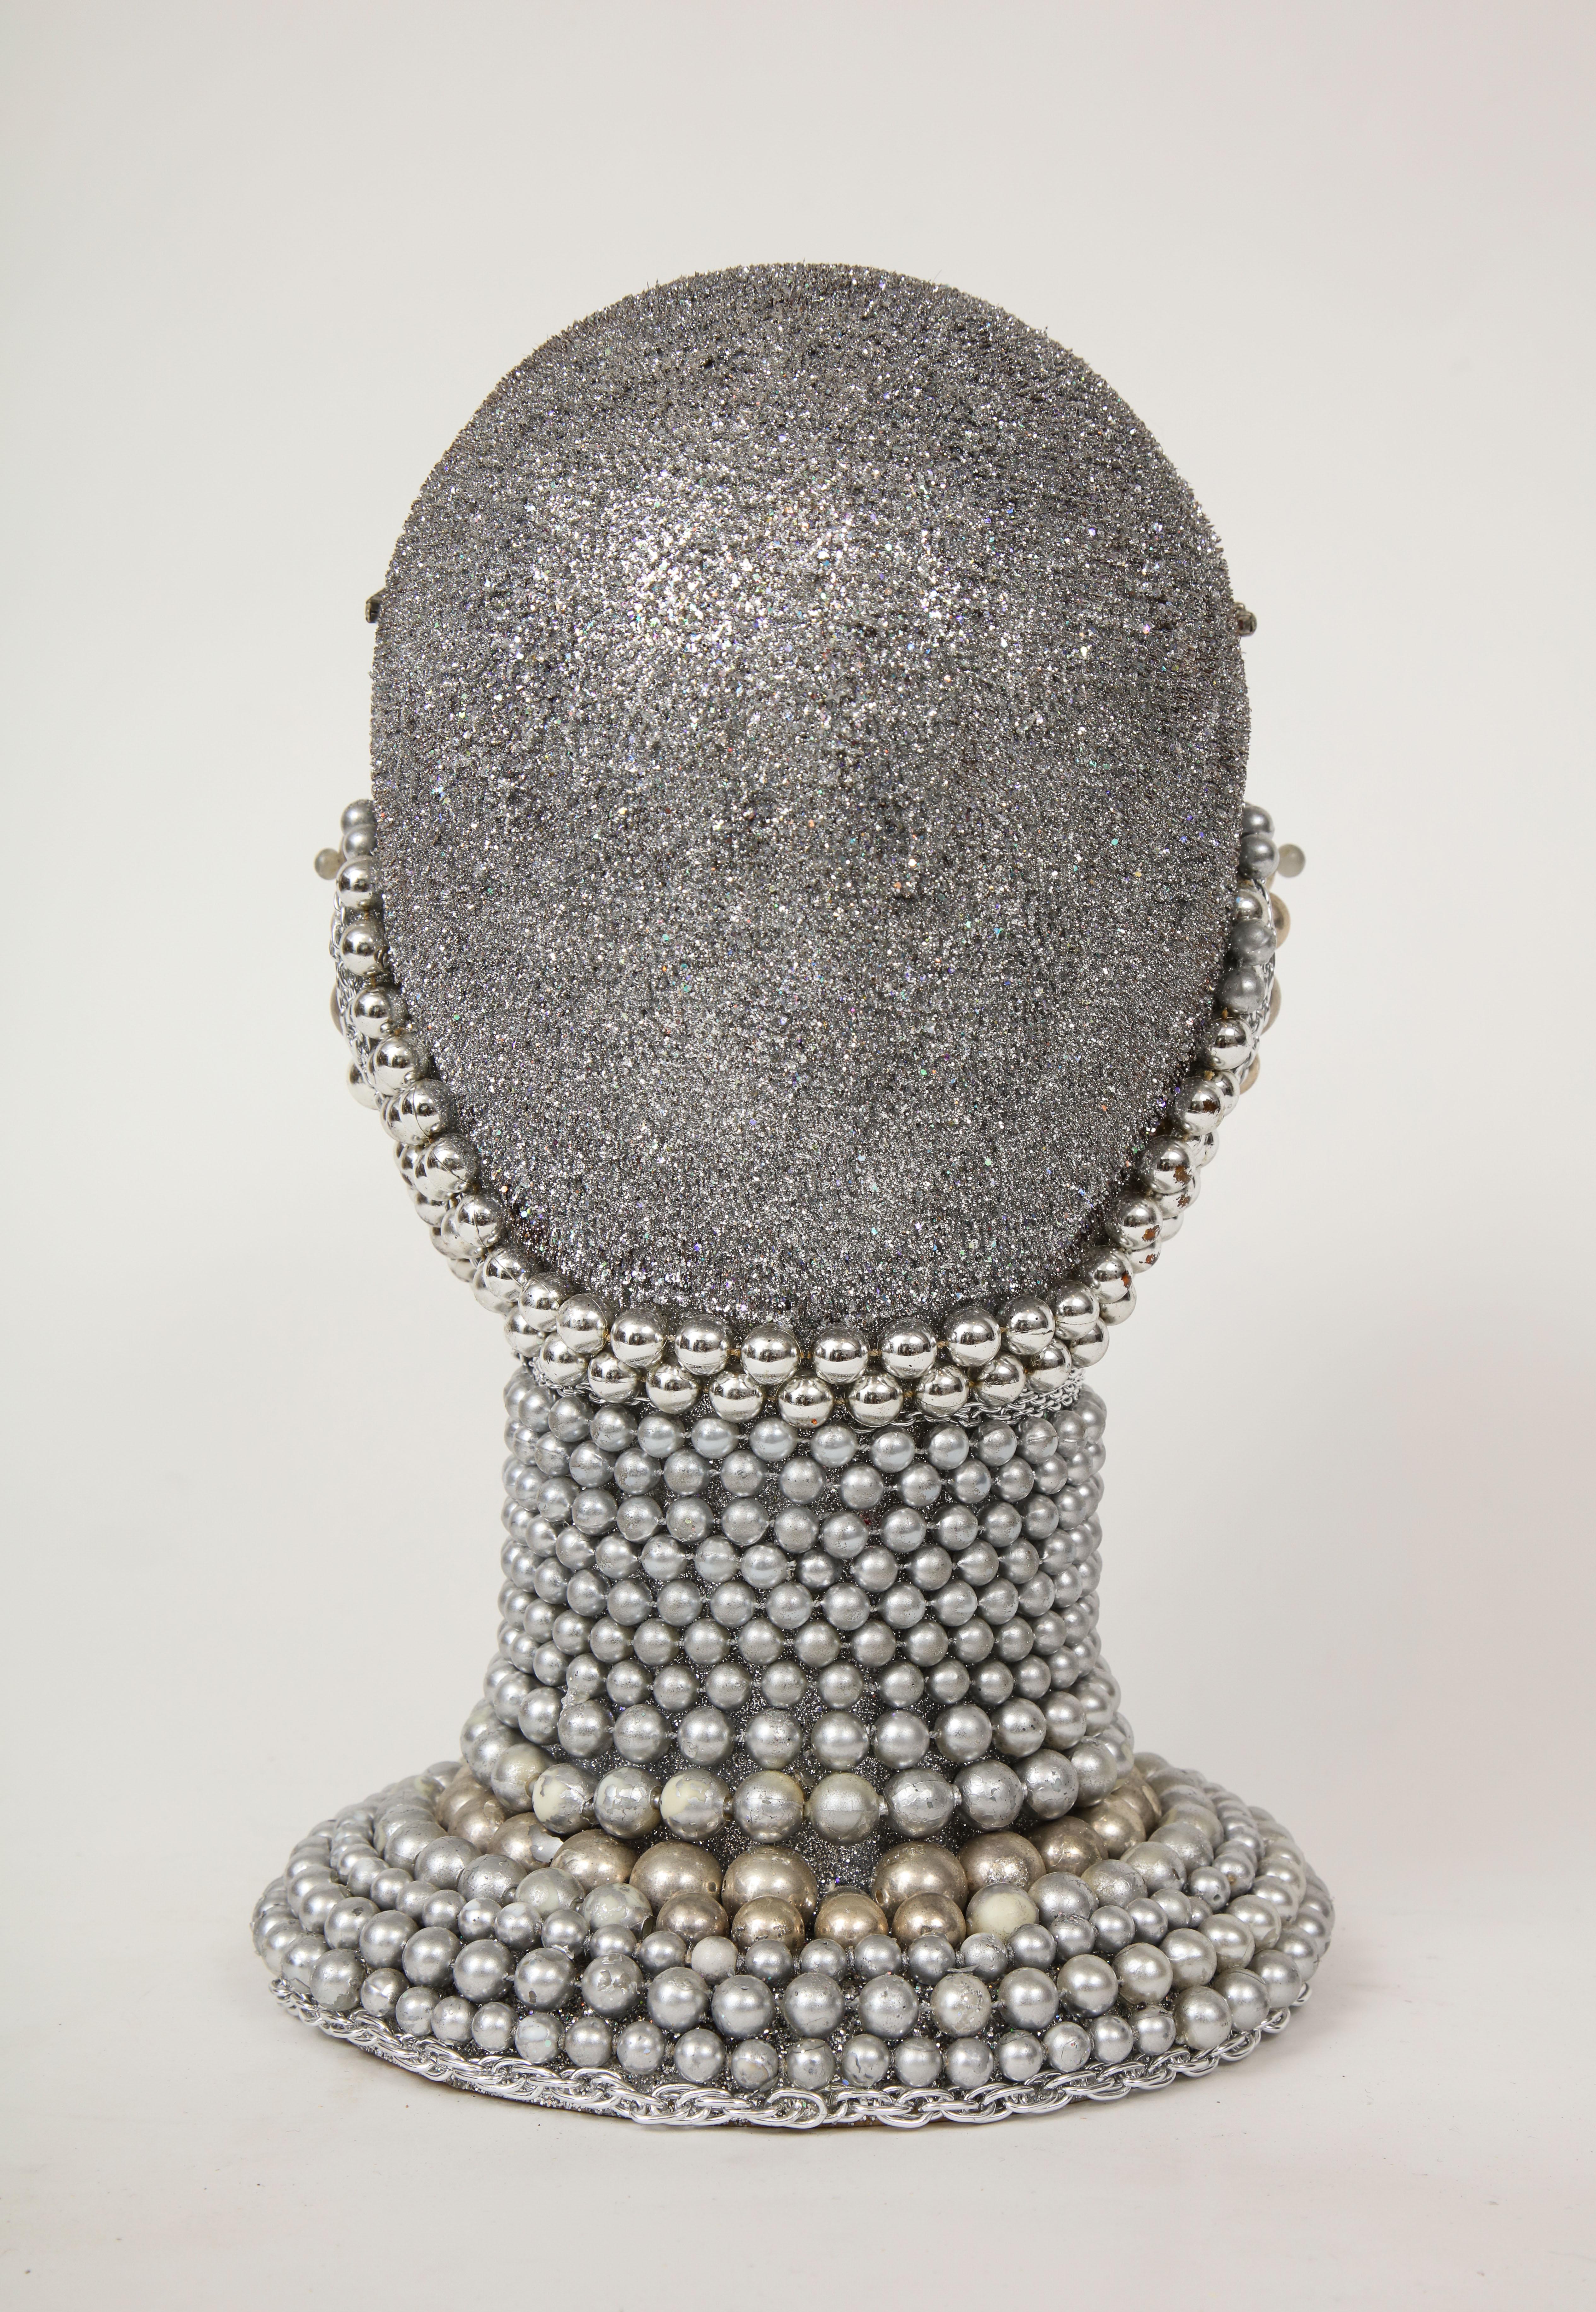 Modern W. Beaupre Chain Mail Bust For Sale